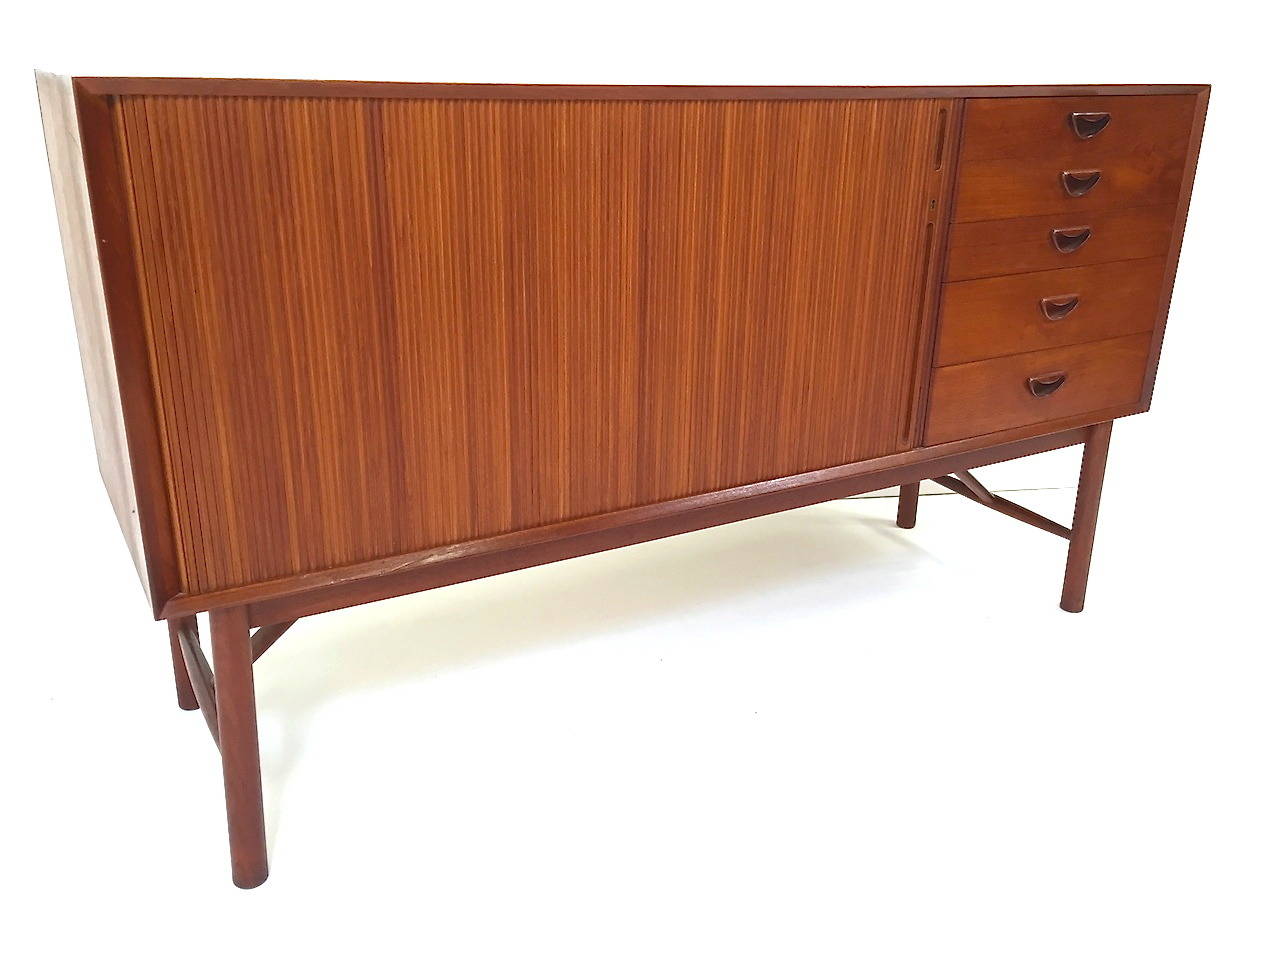 Danish modern teak tambour door credenza by Peter Hvidt & Orla Mølgaard Nielsen. Features a spacious storage area behind the tambour doors with two adjustable shelves as well as five drawers on the right hand side. Top quality Danish design and